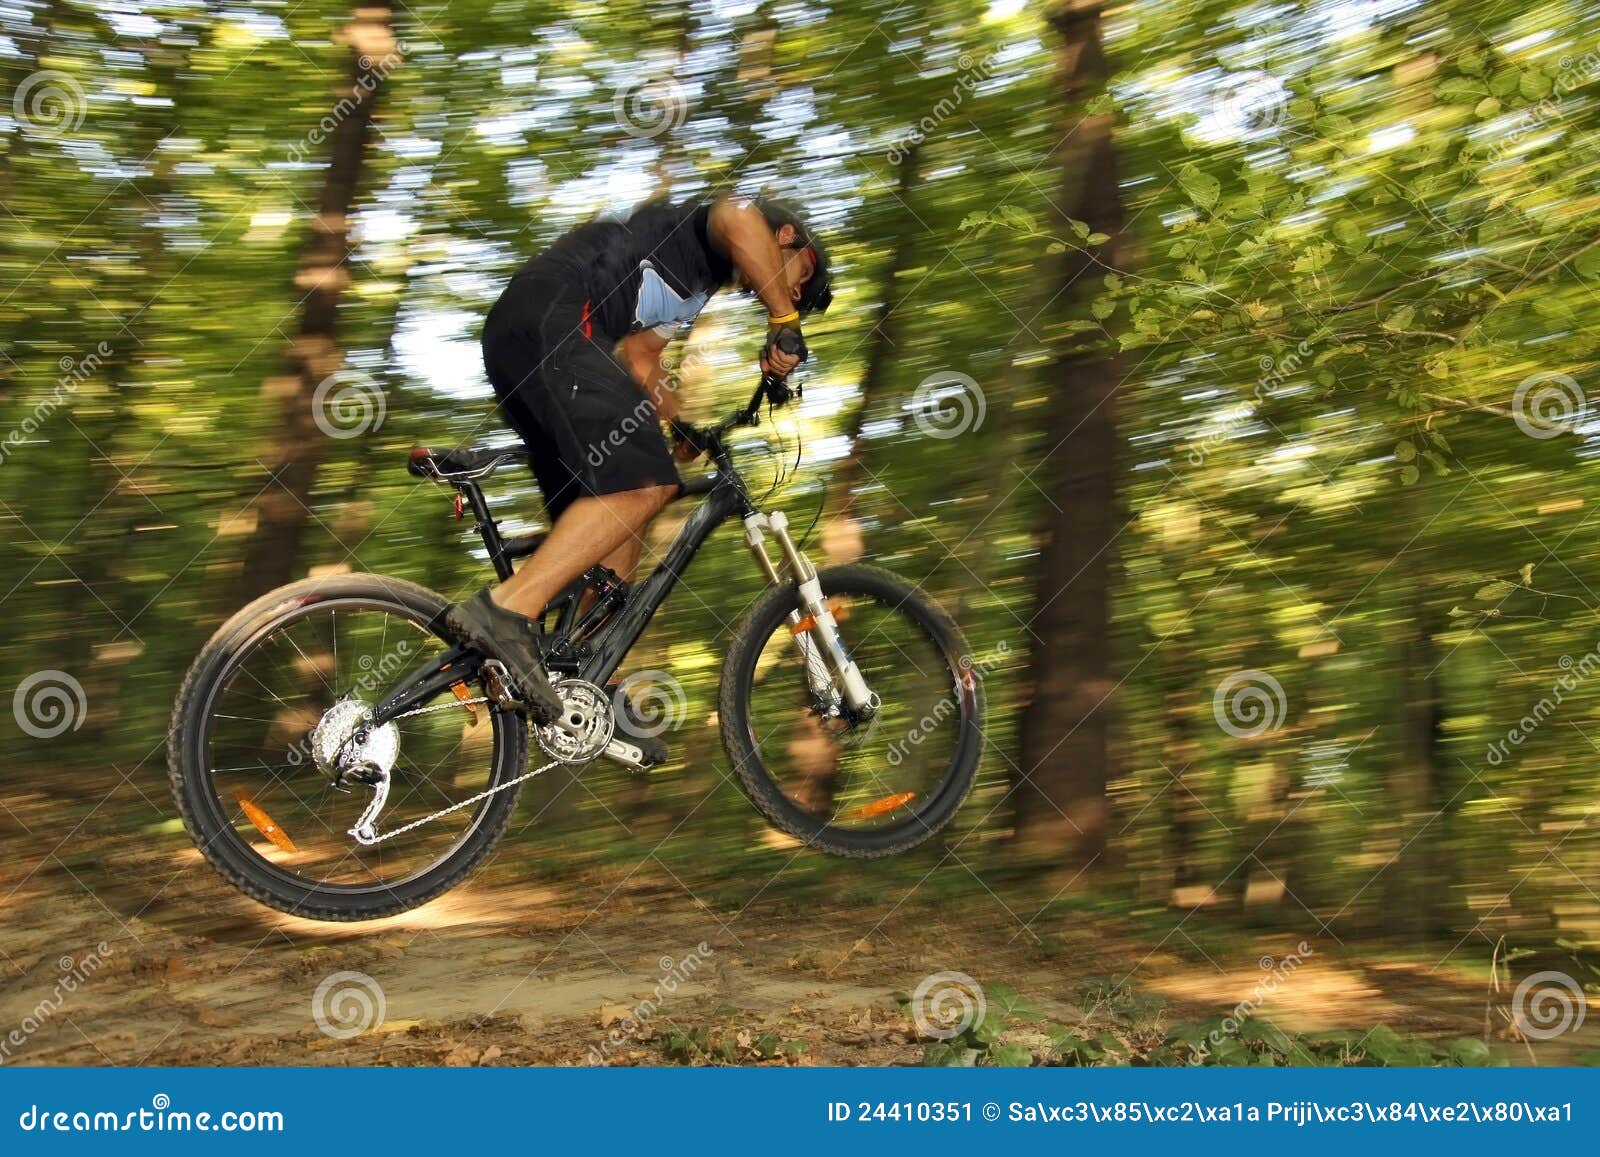 Extreme MTB cyclist stock image. Image of hobby, bicycle - 24410351